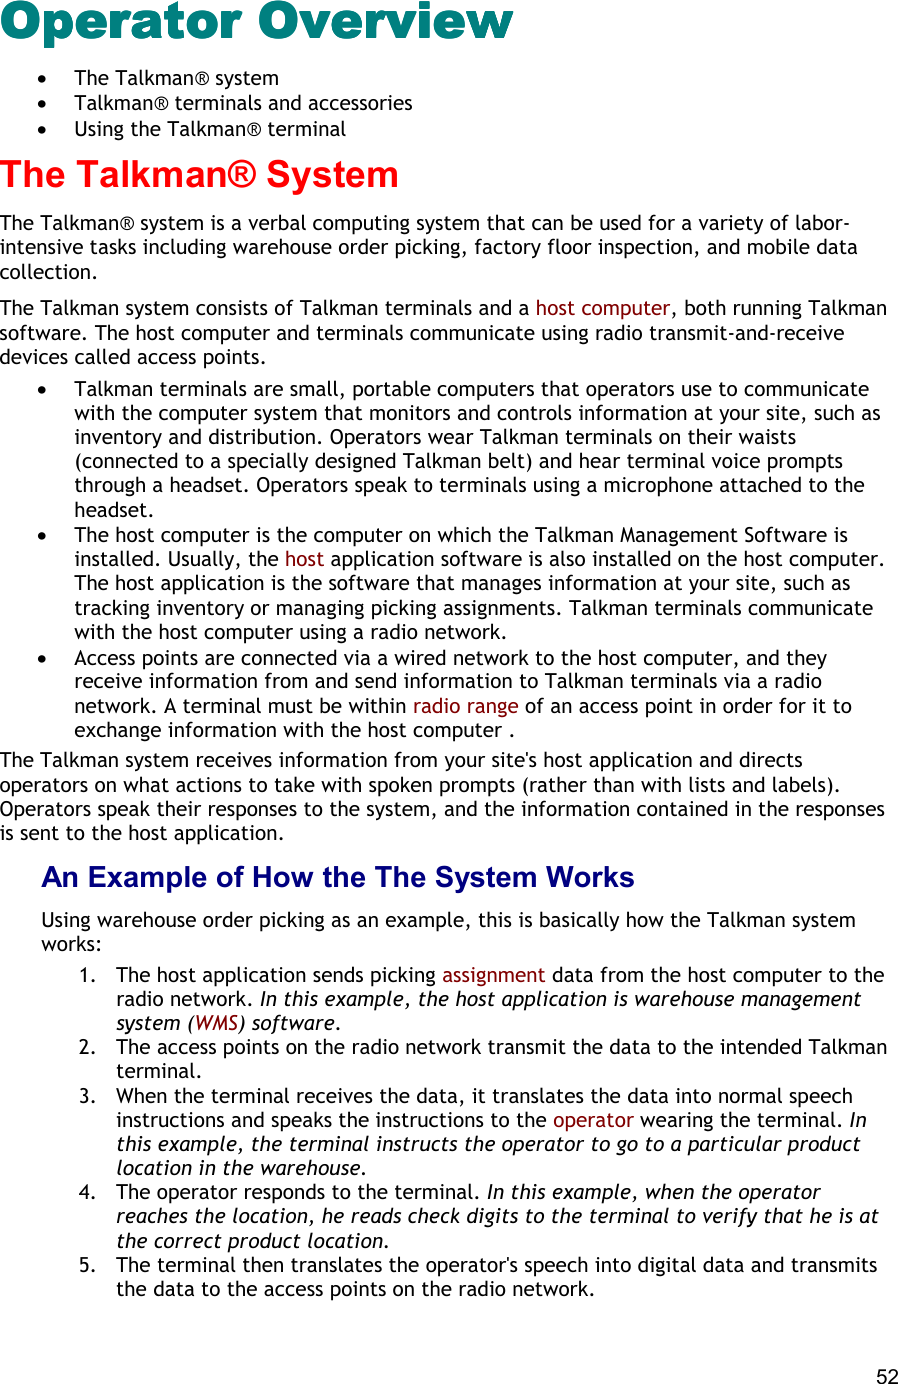  52 Operator Overview Operator Overview Operator Overview Operator Overview  •  The Talkman® system •  Talkman® terminals and accessories •  Using the Talkman® terminal The Talkman® System The Talkman® system is a verbal computing system that can be used for a variety of labor-intensive tasks including warehouse order picking, factory floor inspection, and mobile data collection. The Talkman system consists of Talkman terminals and a host computer, both running Talkman software. The host computer and terminals communicate using radio transmit-and-receive devices called access points.  •  Talkman terminals are small, portable computers that operators use to communicate with the computer system that monitors and controls information at your site, such as inventory and distribution. Operators wear Talkman terminals on their waists (connected to a specially designed Talkman belt) and hear terminal voice prompts through a headset. Operators speak to terminals using a microphone attached to the headset. •  The host computer is the computer on which the Talkman Management Software is installed. Usually, the host application software is also installed on the host computer. The host application is the software that manages information at your site, such as tracking inventory or managing picking assignments. Talkman terminals communicate with the host computer using a radio network. •  Access points are connected via a wired network to the host computer, and they receive information from and send information to Talkman terminals via a radio network. A terminal must be within radio range of an access point in order for it to exchange information with the host computer . The Talkman system receives information from your site&apos;s host application and directs operators on what actions to take with spoken prompts (rather than with lists and labels). Operators speak their responses to the system, and the information contained in the responses is sent to the host application. An Example of How the The System Works Using warehouse order picking as an example, this is basically how the Talkman system works:  1.  The host application sends picking assignment data from the host computer to the radio network. In this example, the host application is warehouse management system (WMS) software. 2.  The access points on the radio network transmit the data to the intended Talkman terminal. 3.  When the terminal receives the data, it translates the data into normal speech instructions and speaks the instructions to the operator wearing the terminal. In this example, the terminal instructs the operator to go to a particular product location in the warehouse. 4.  The operator responds to the terminal. In this example, when the operator reaches the location, he reads check digits to the terminal to verify that he is at the correct product location. 5.  The terminal then translates the operator&apos;s speech into digital data and transmits the data to the access points on the radio network. 